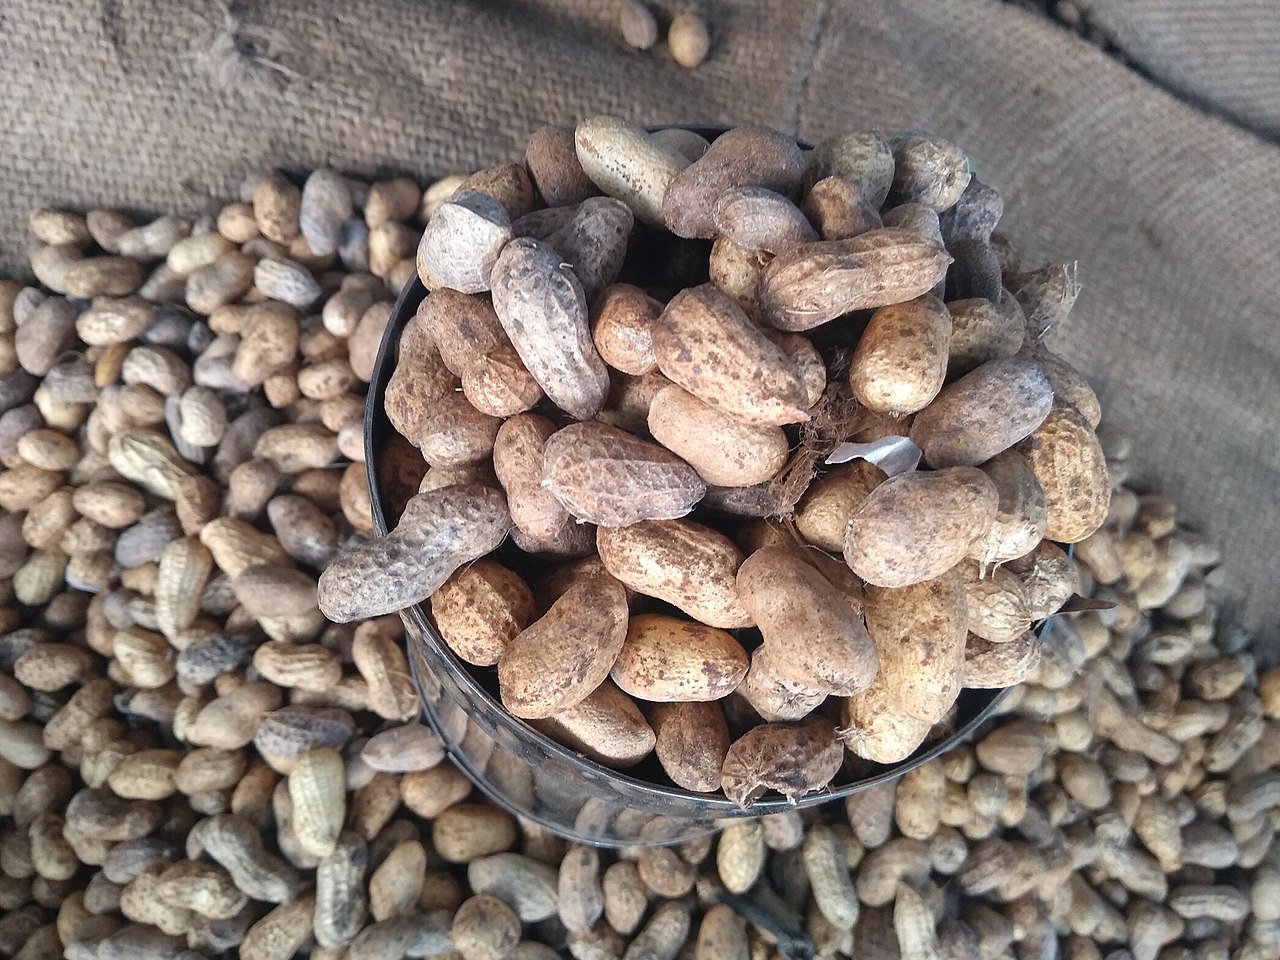 New Peanut or Groundnut crop Revenue Decline: Agriculture of Gujarat of Peanut or Groundnut Revenue expected to rise from Monday